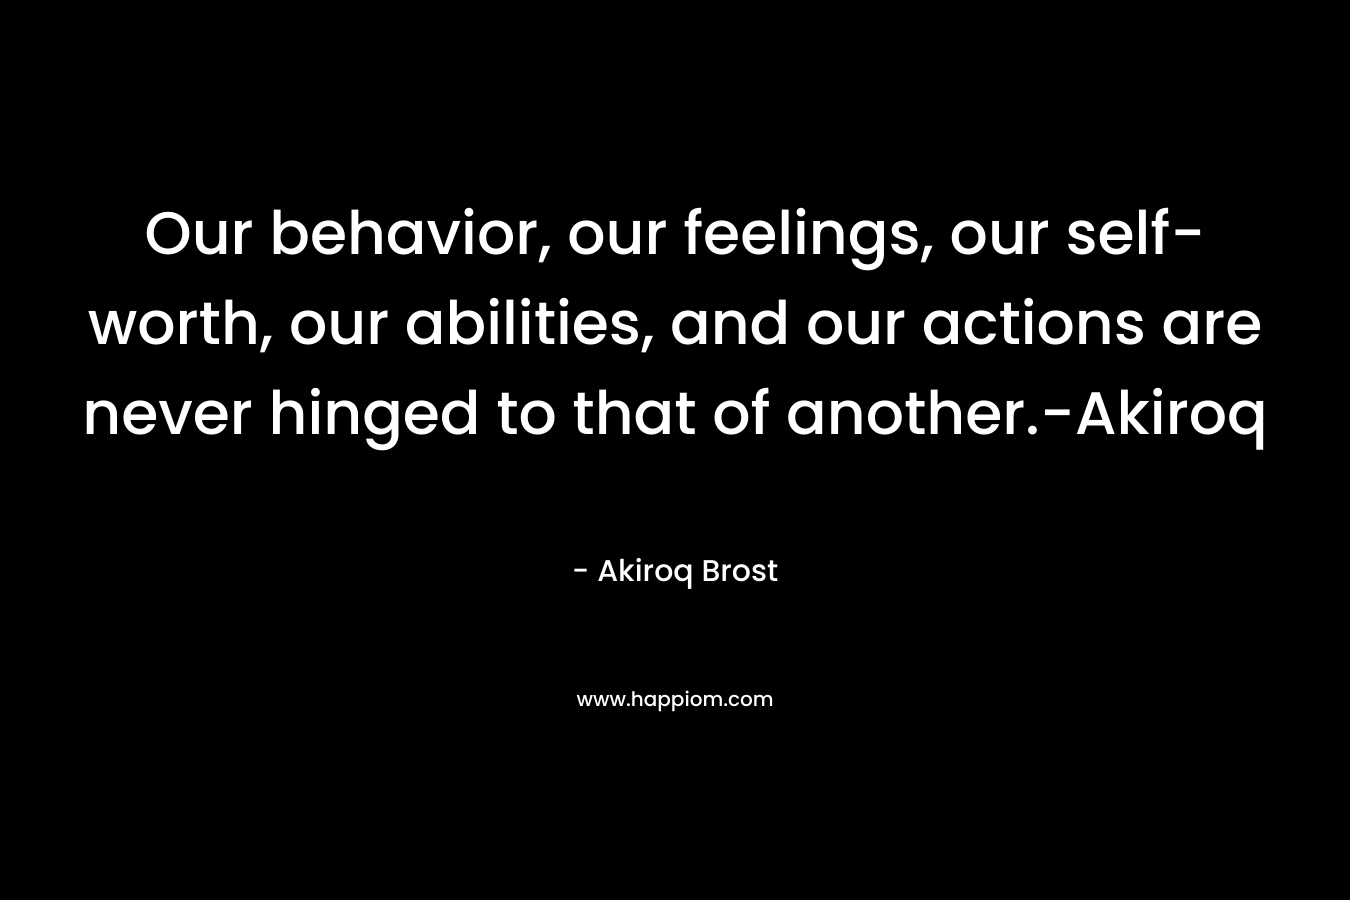 Our behavior, our feelings, our self-worth, our abilities, and our actions are never hinged to that of another.-Akiroq – Akiroq Brost